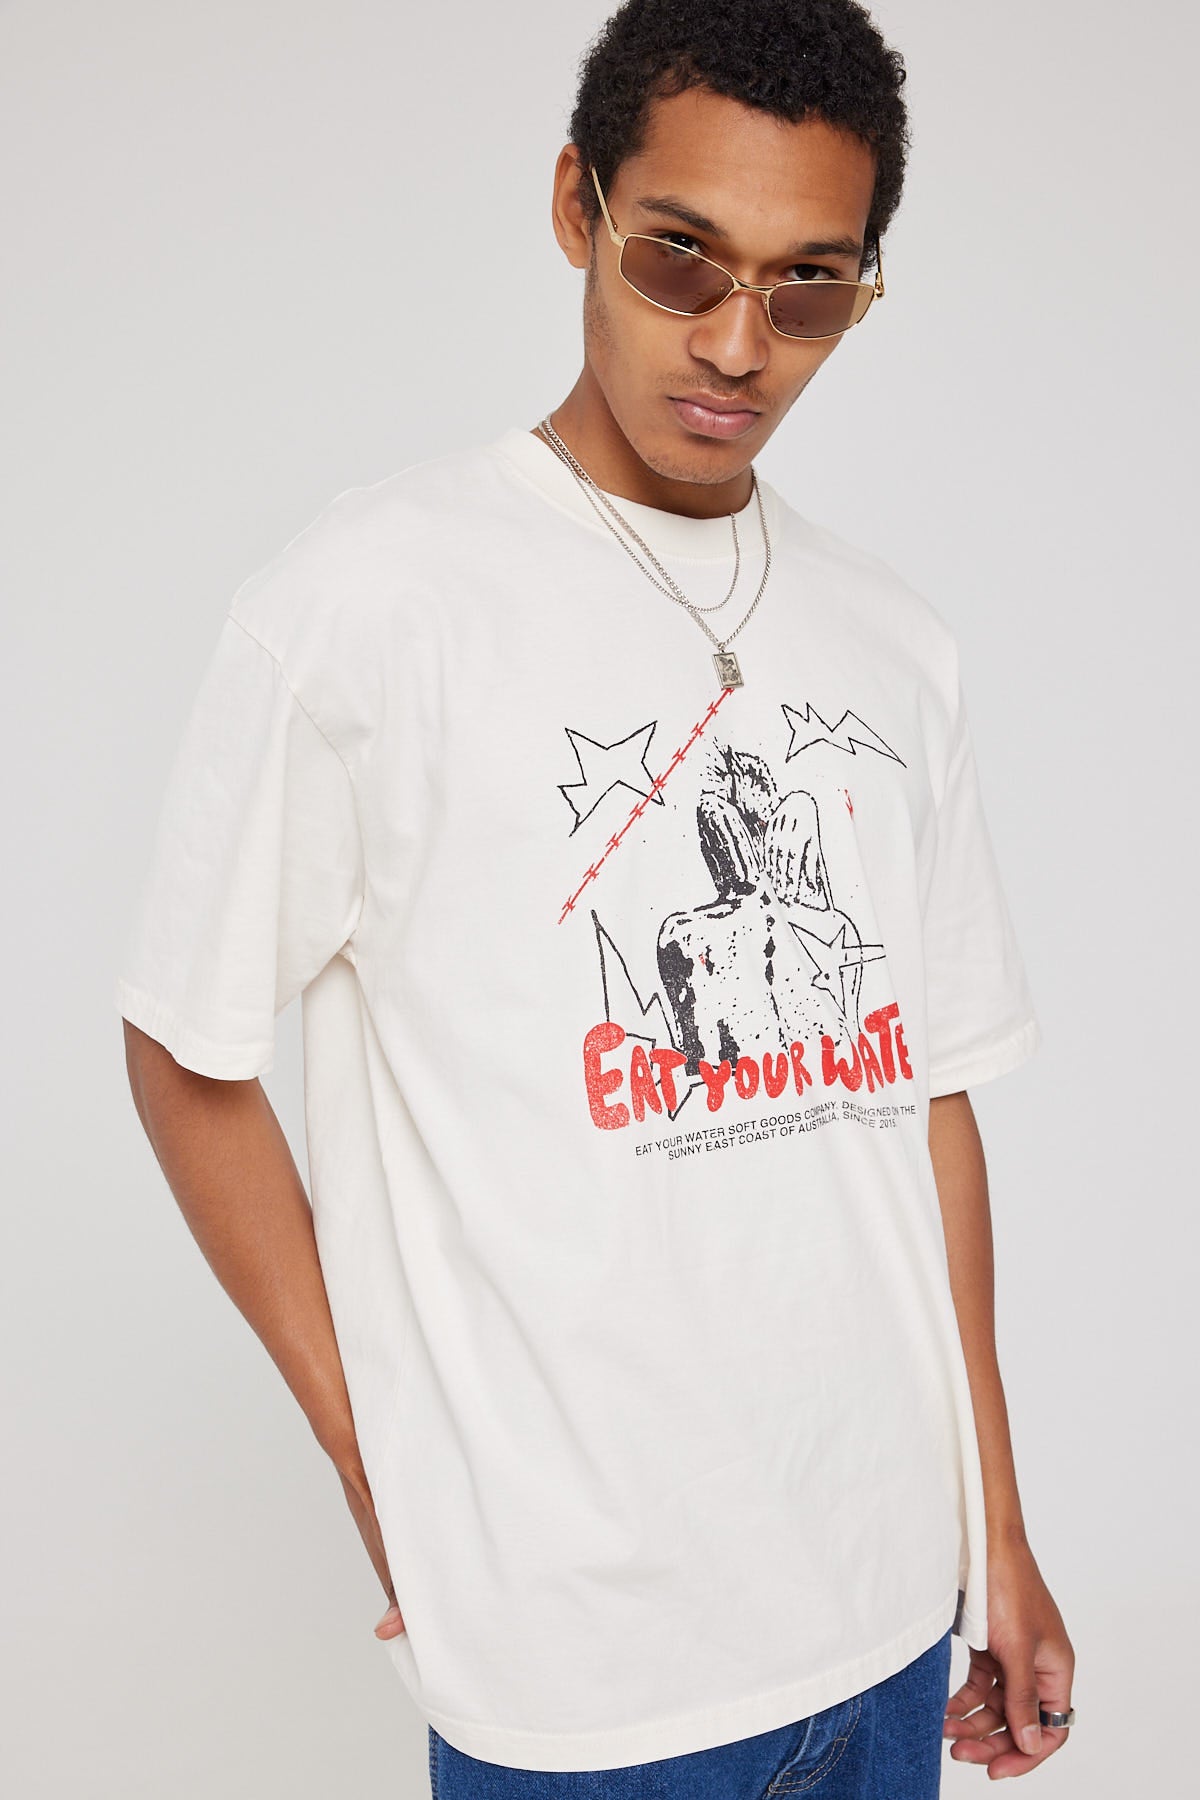 Eat Your Water Realm Tee White